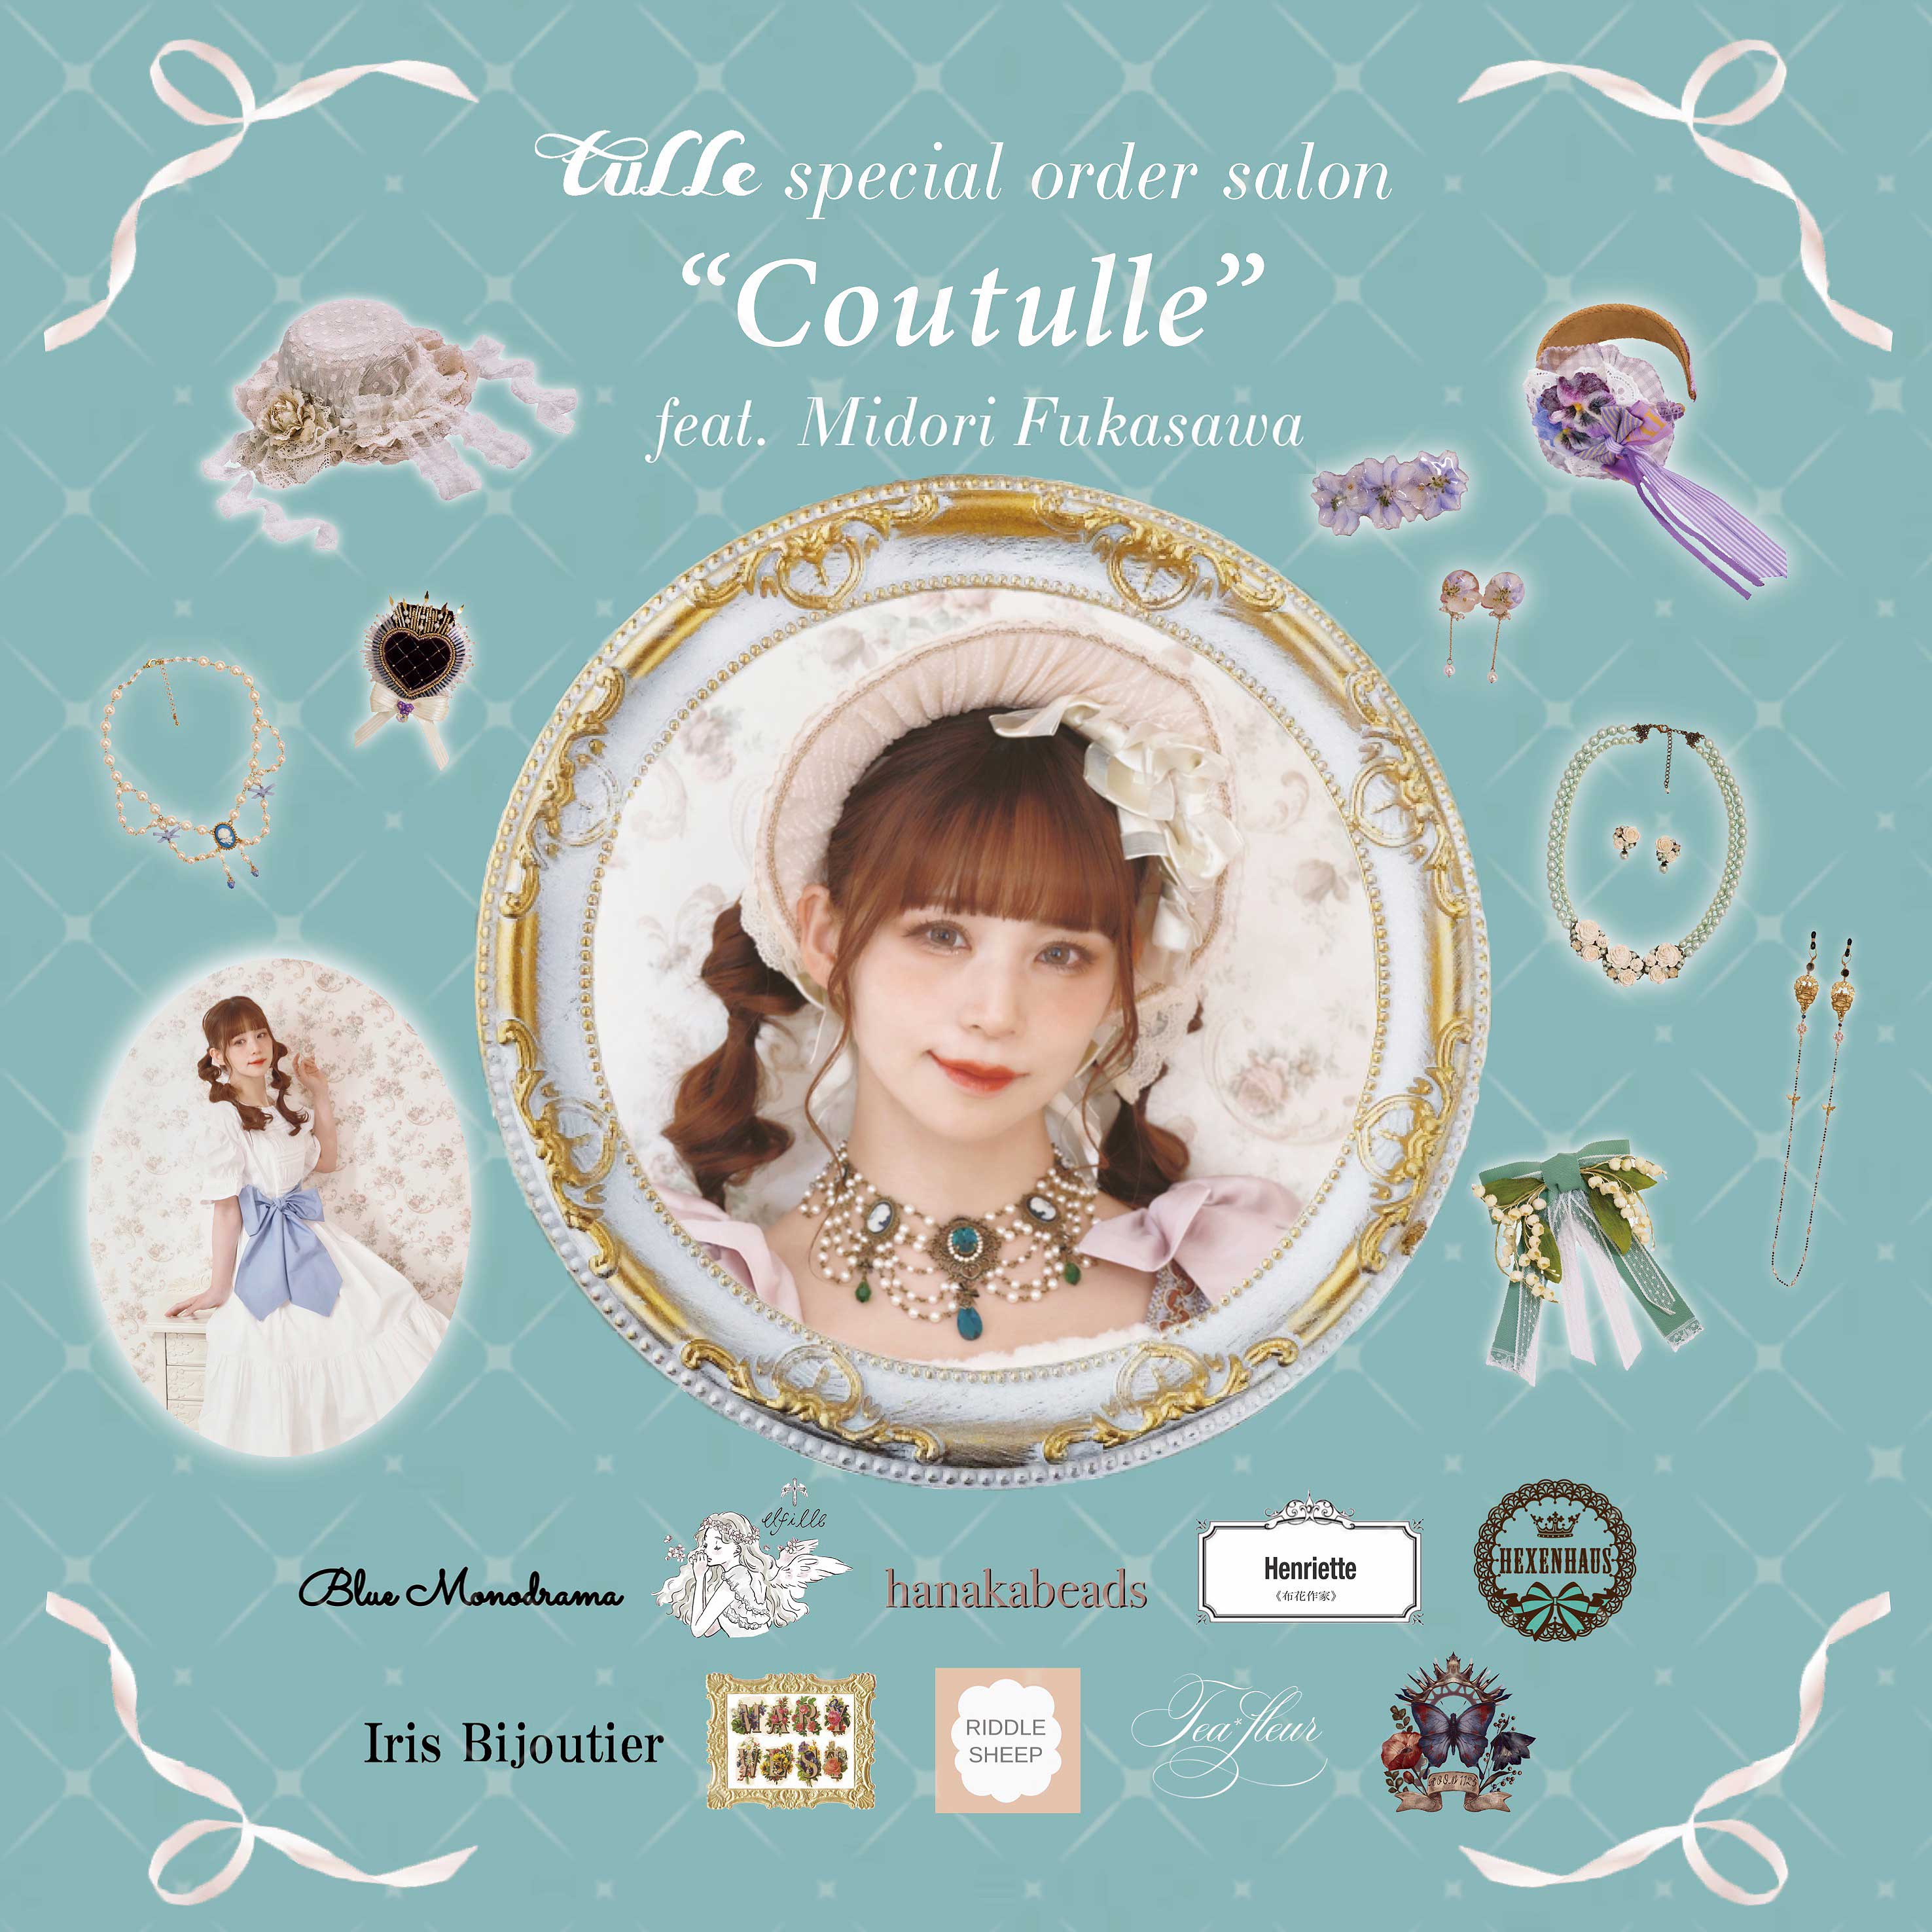 tulle special order salon"Coutulle" 2nd museに深澤翠ちゃんが降臨